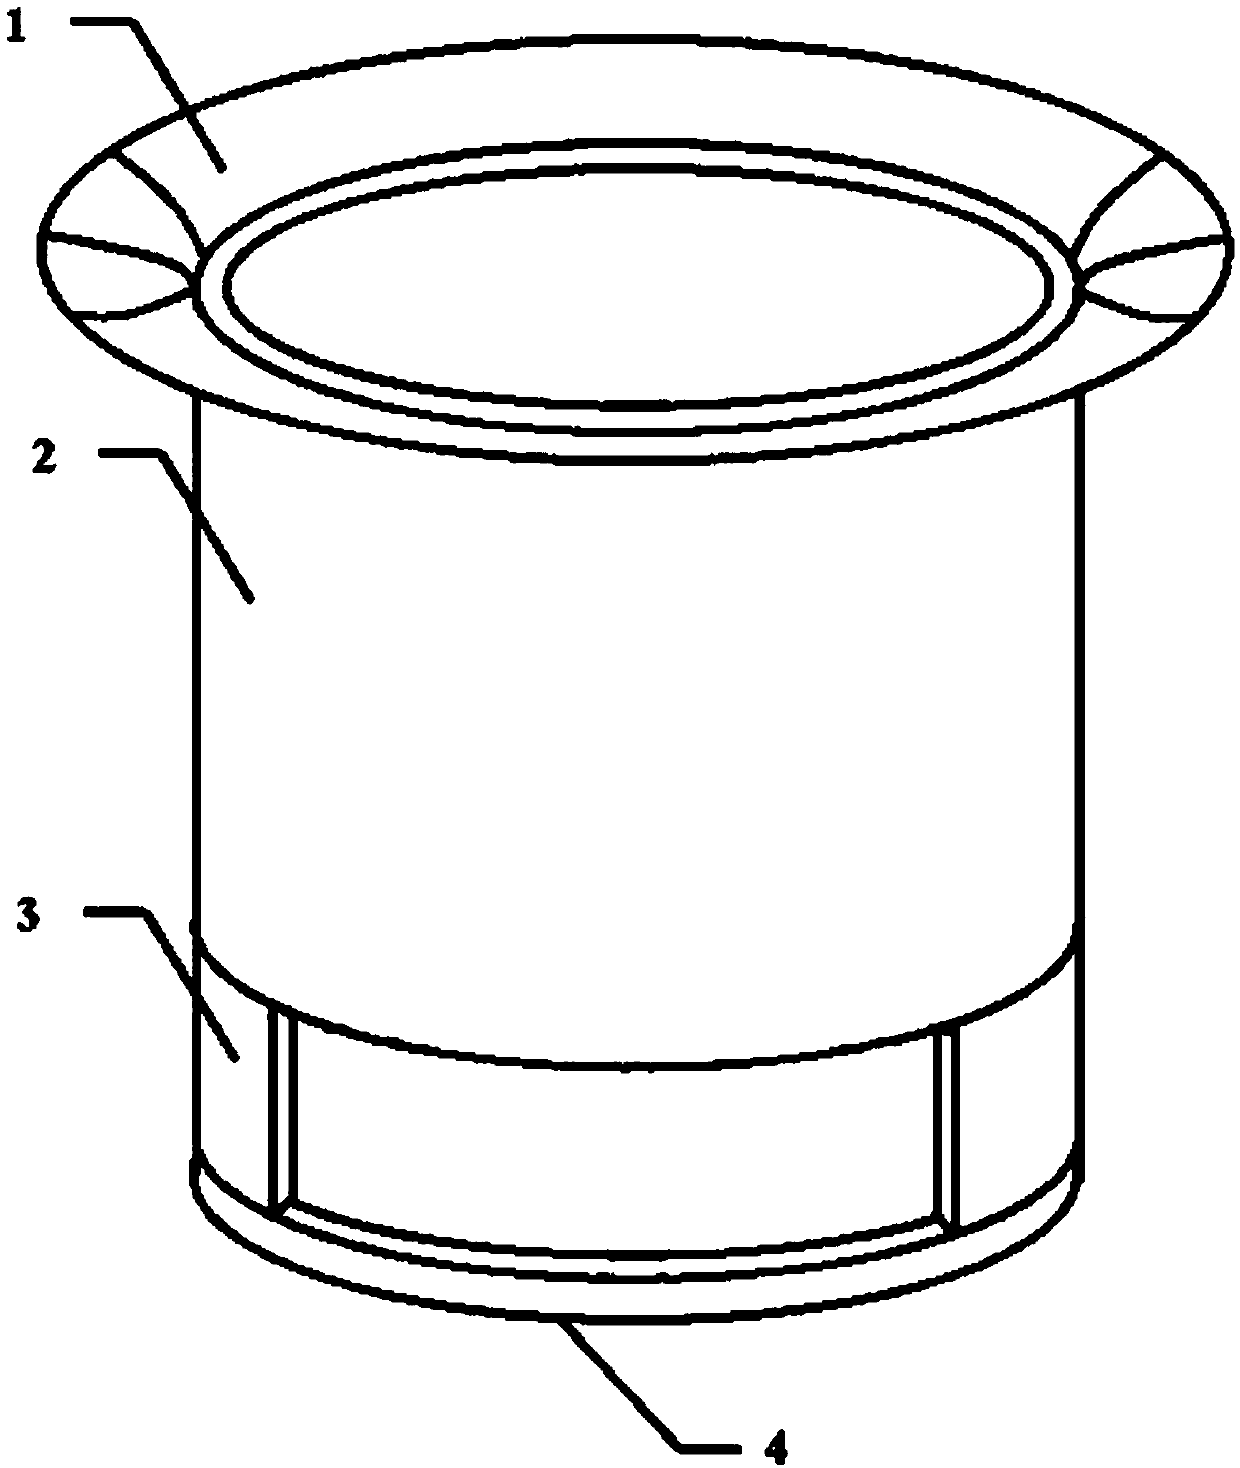 Flowerpot capable of preventing water from flowing out